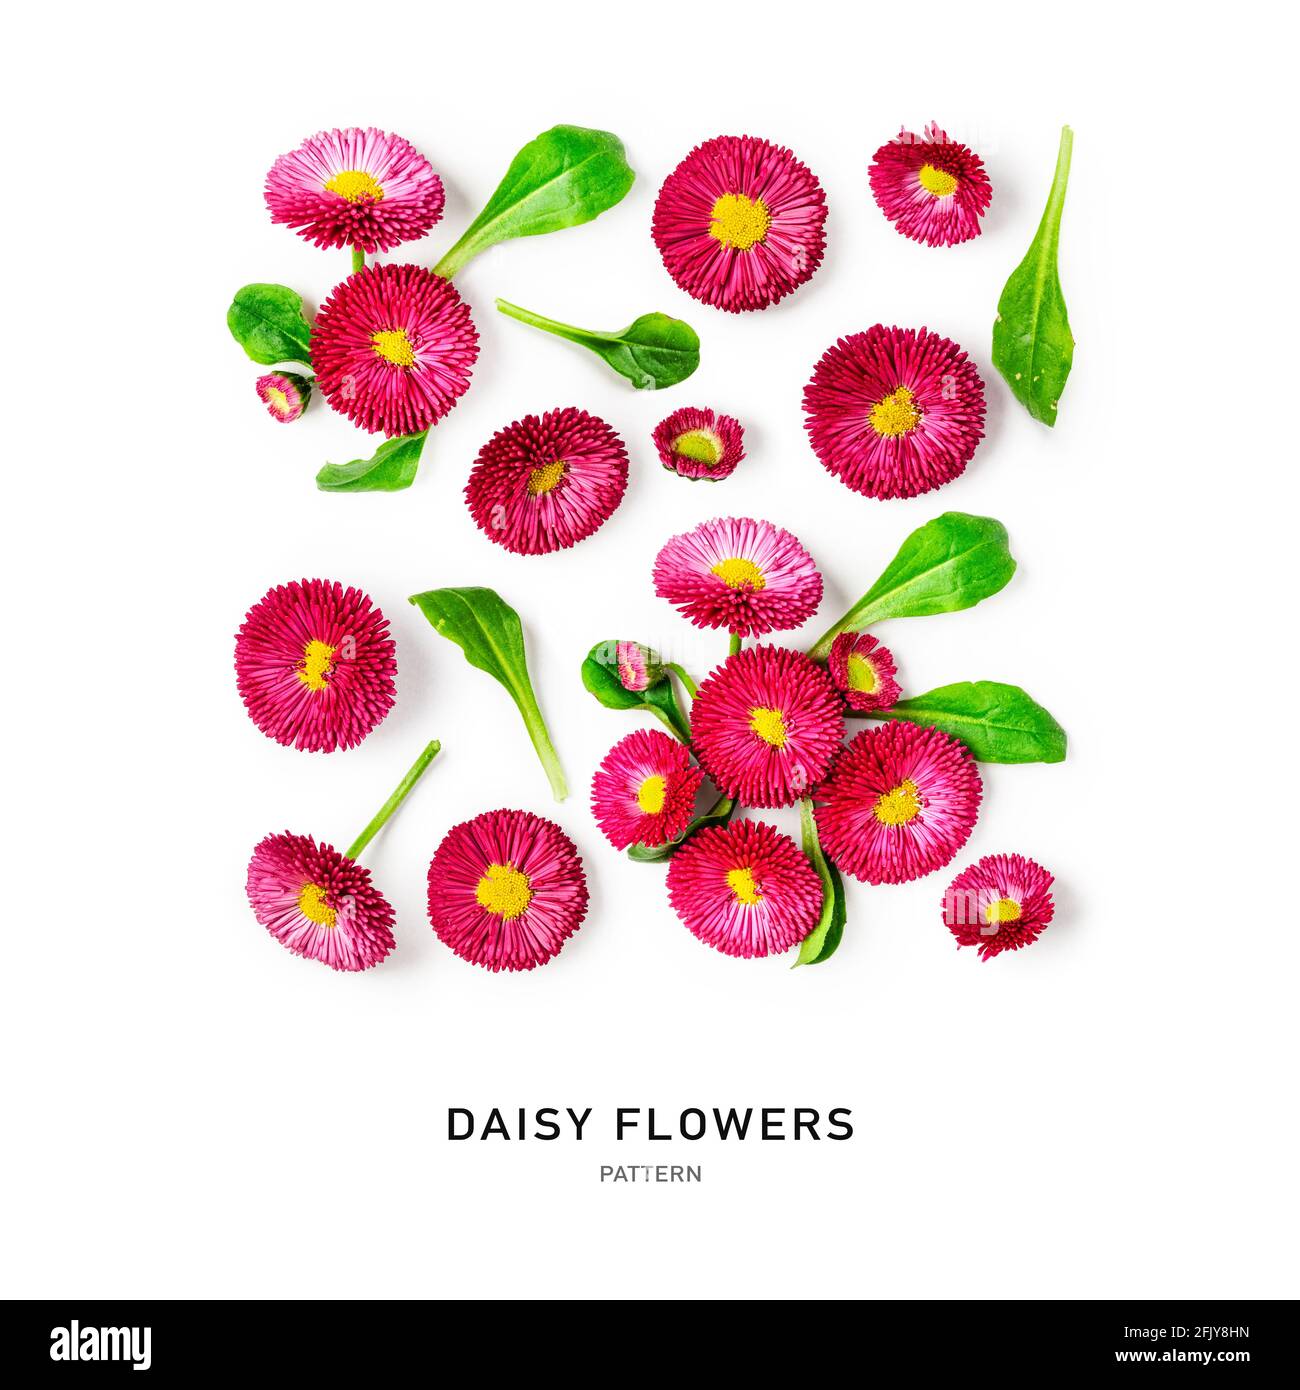 Daisy flower creative pattern and collection. Pink bellis perennis flowers isolated on white background. Floral arrangement, design element. Springtim Stock Photo